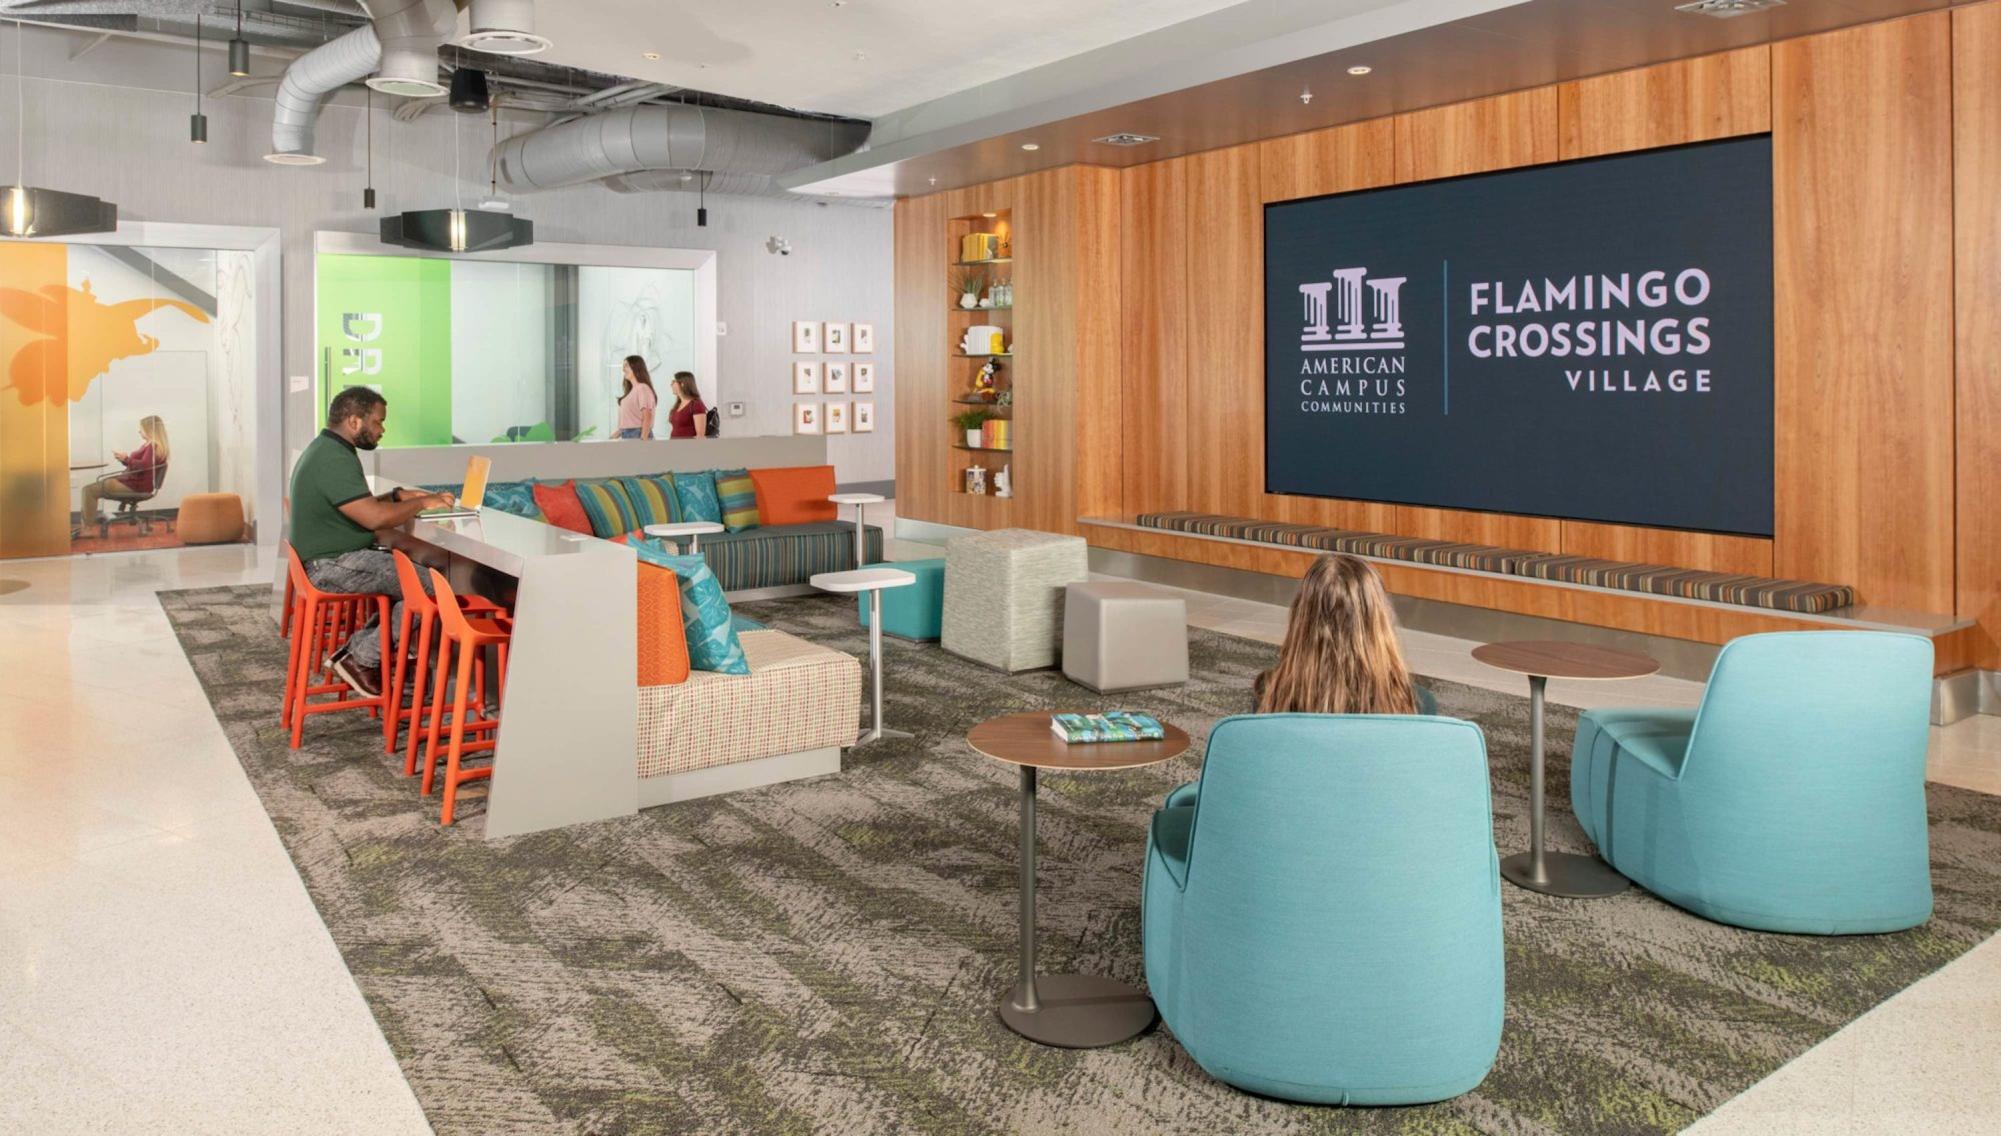 Flamingo Crossings Village lobby with large television display and open seating area. 